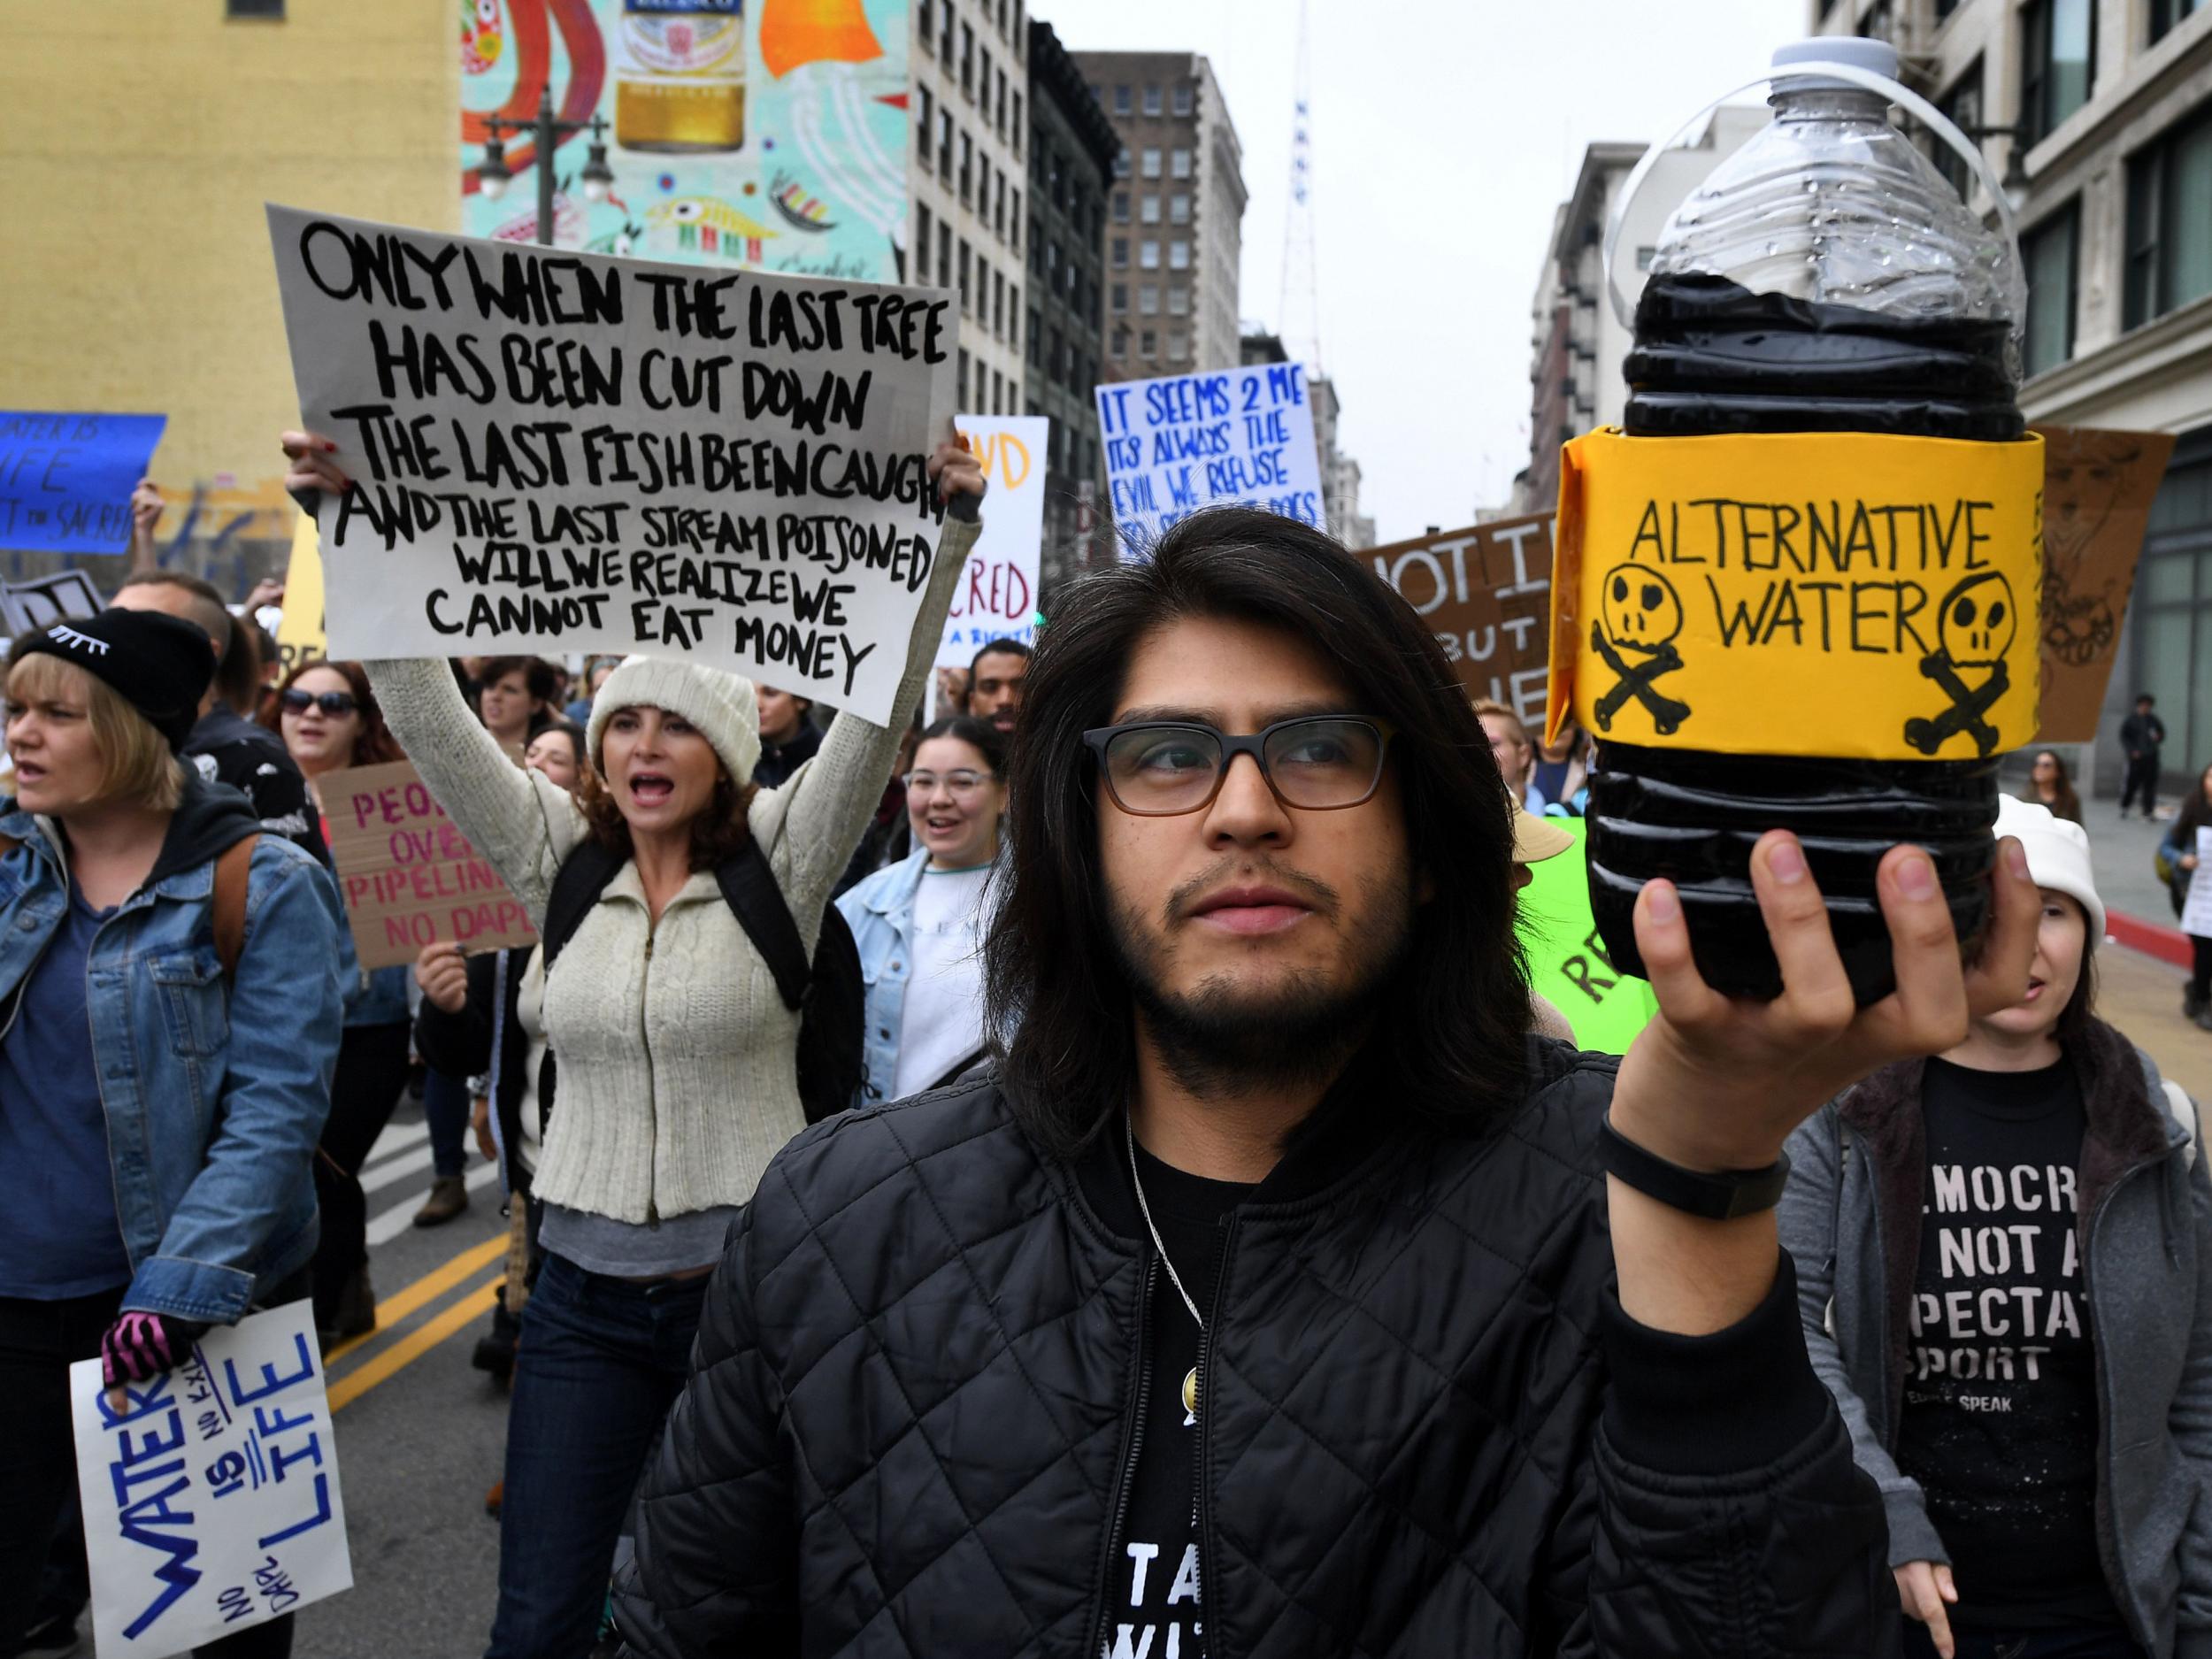 The Keystone XL pipeline has been met with fierce resistance from environmentalists